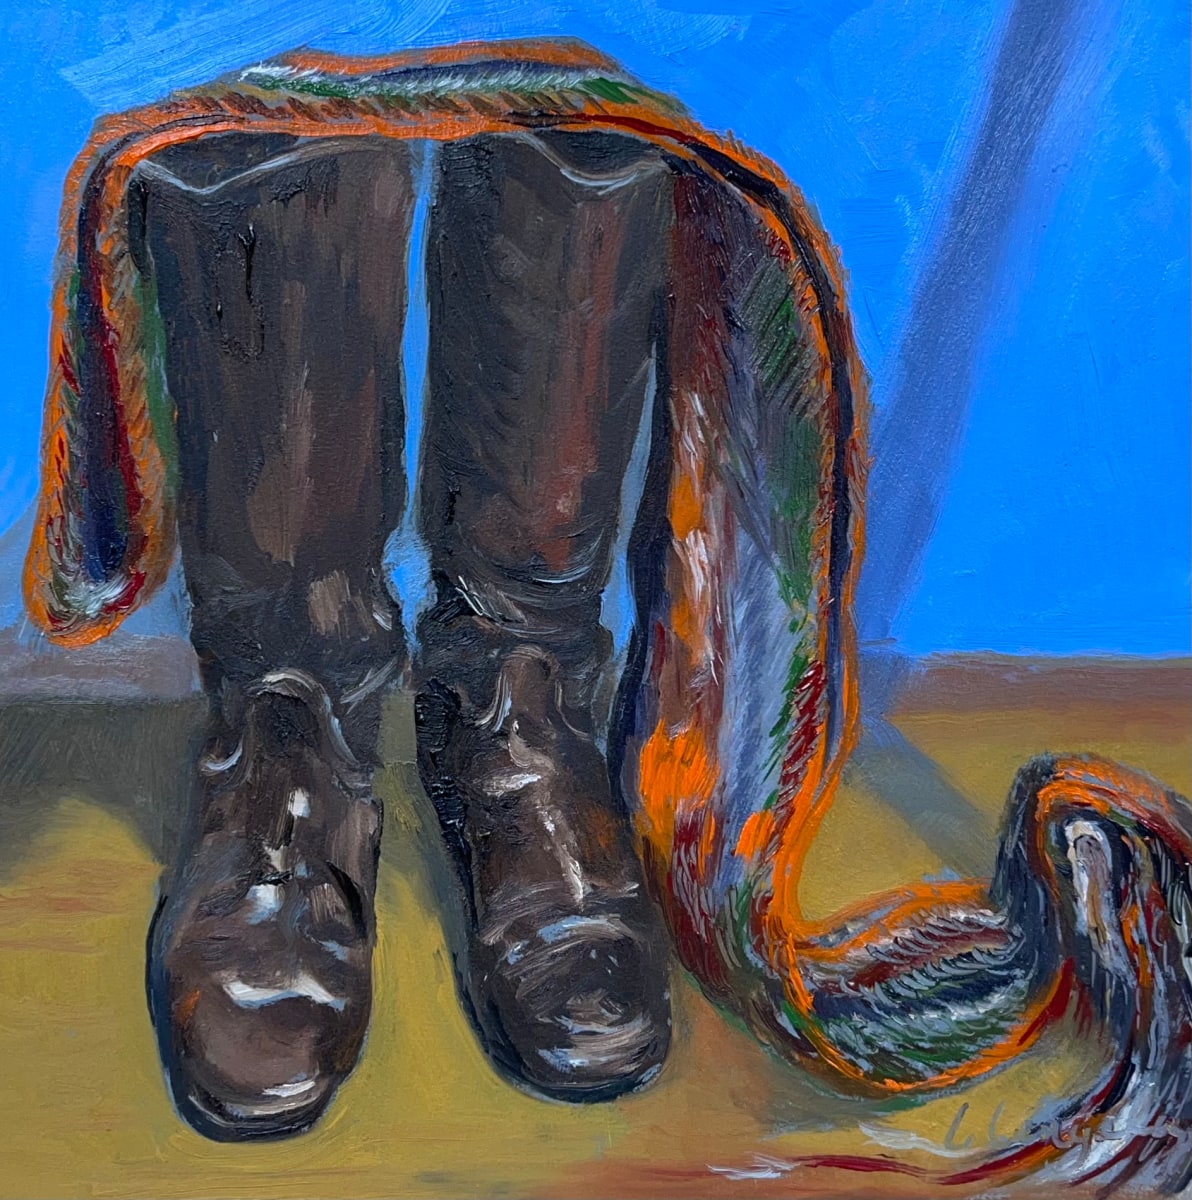 Western Artist Charles Russells' Stovepipe Boots by Laura Lengeling  Image: The artists boots are part of exhibits at the Russell Museum in Great Falls, MT. I enjoyed the personal connection with the artist and took the opportunity to portray his boots and sash that showed wear from love and comfort provided by the objects to the artist.